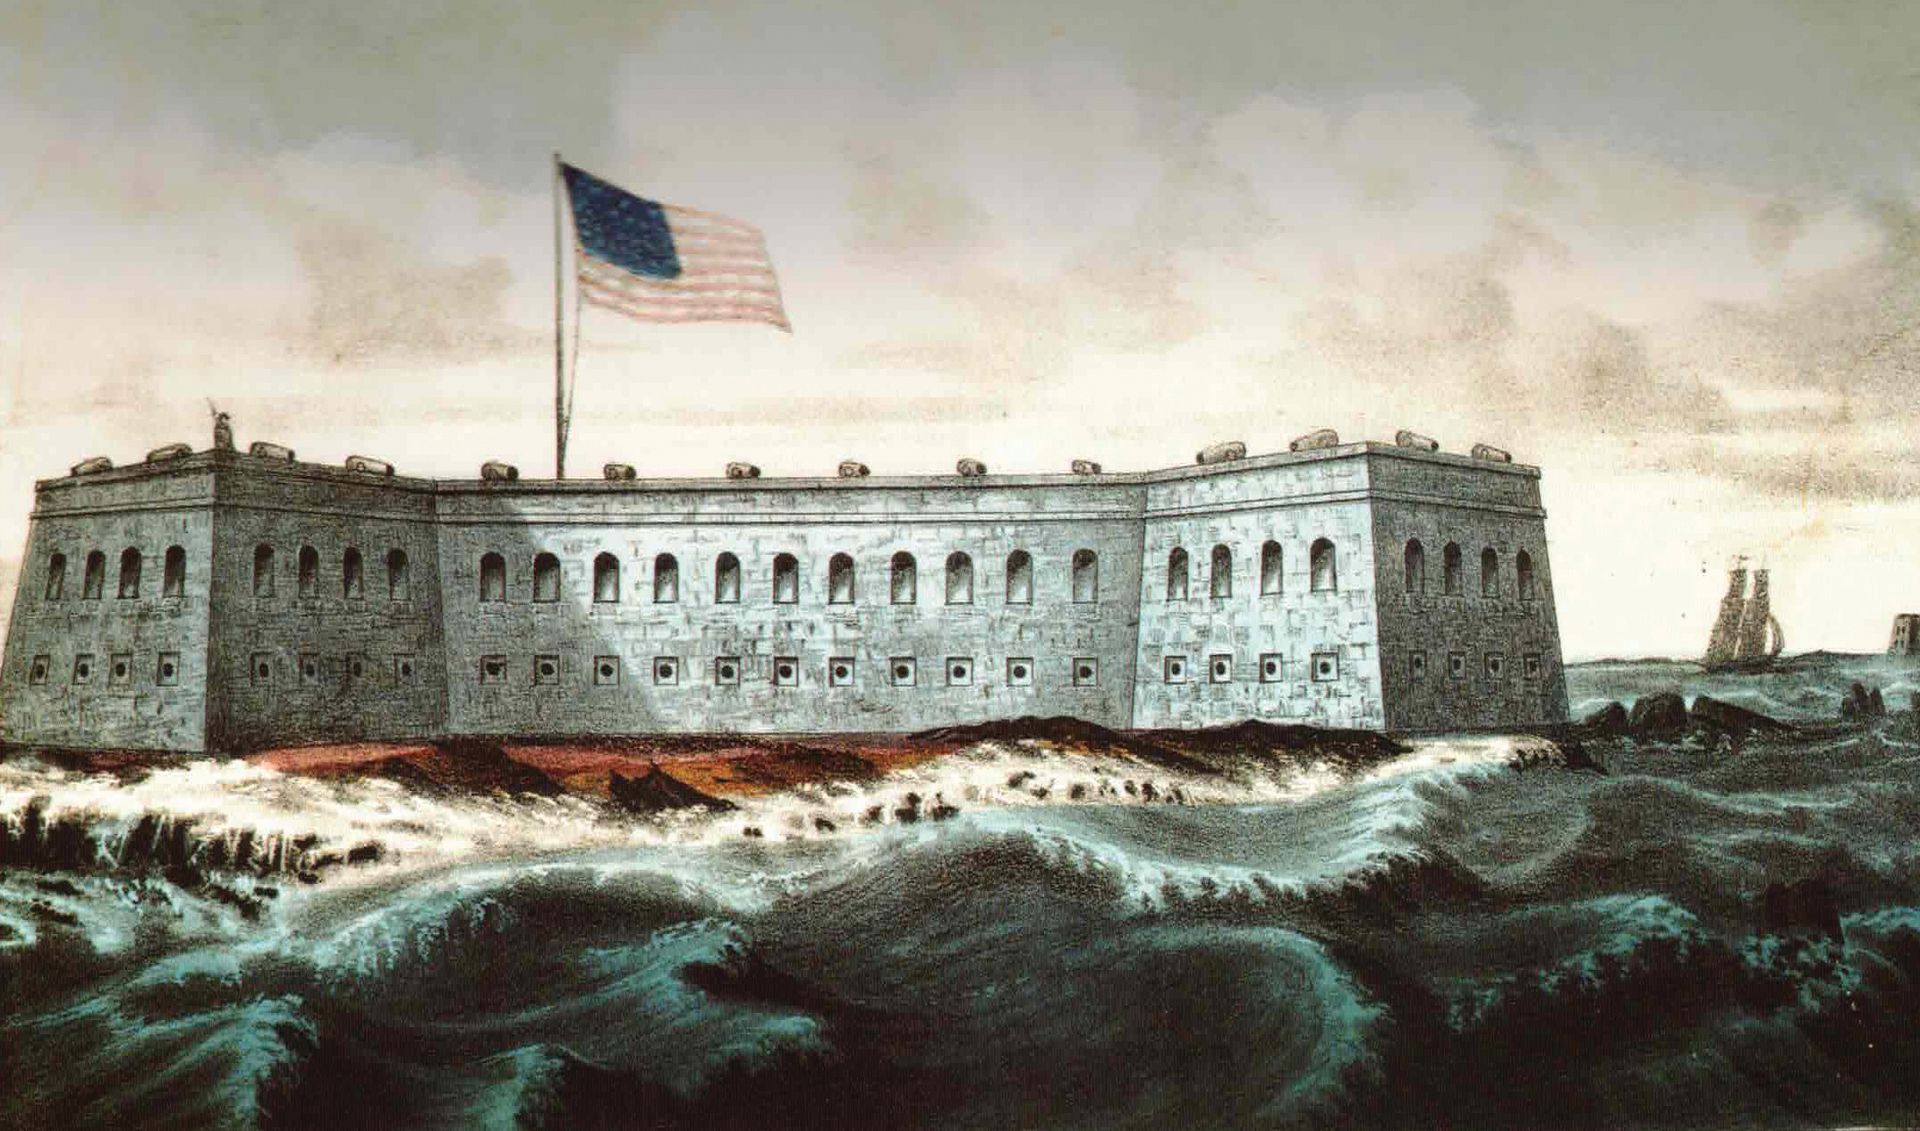 Fort Sumter Caption: An artist sketch of Fort Sumter, 1861 (Library of Congress)